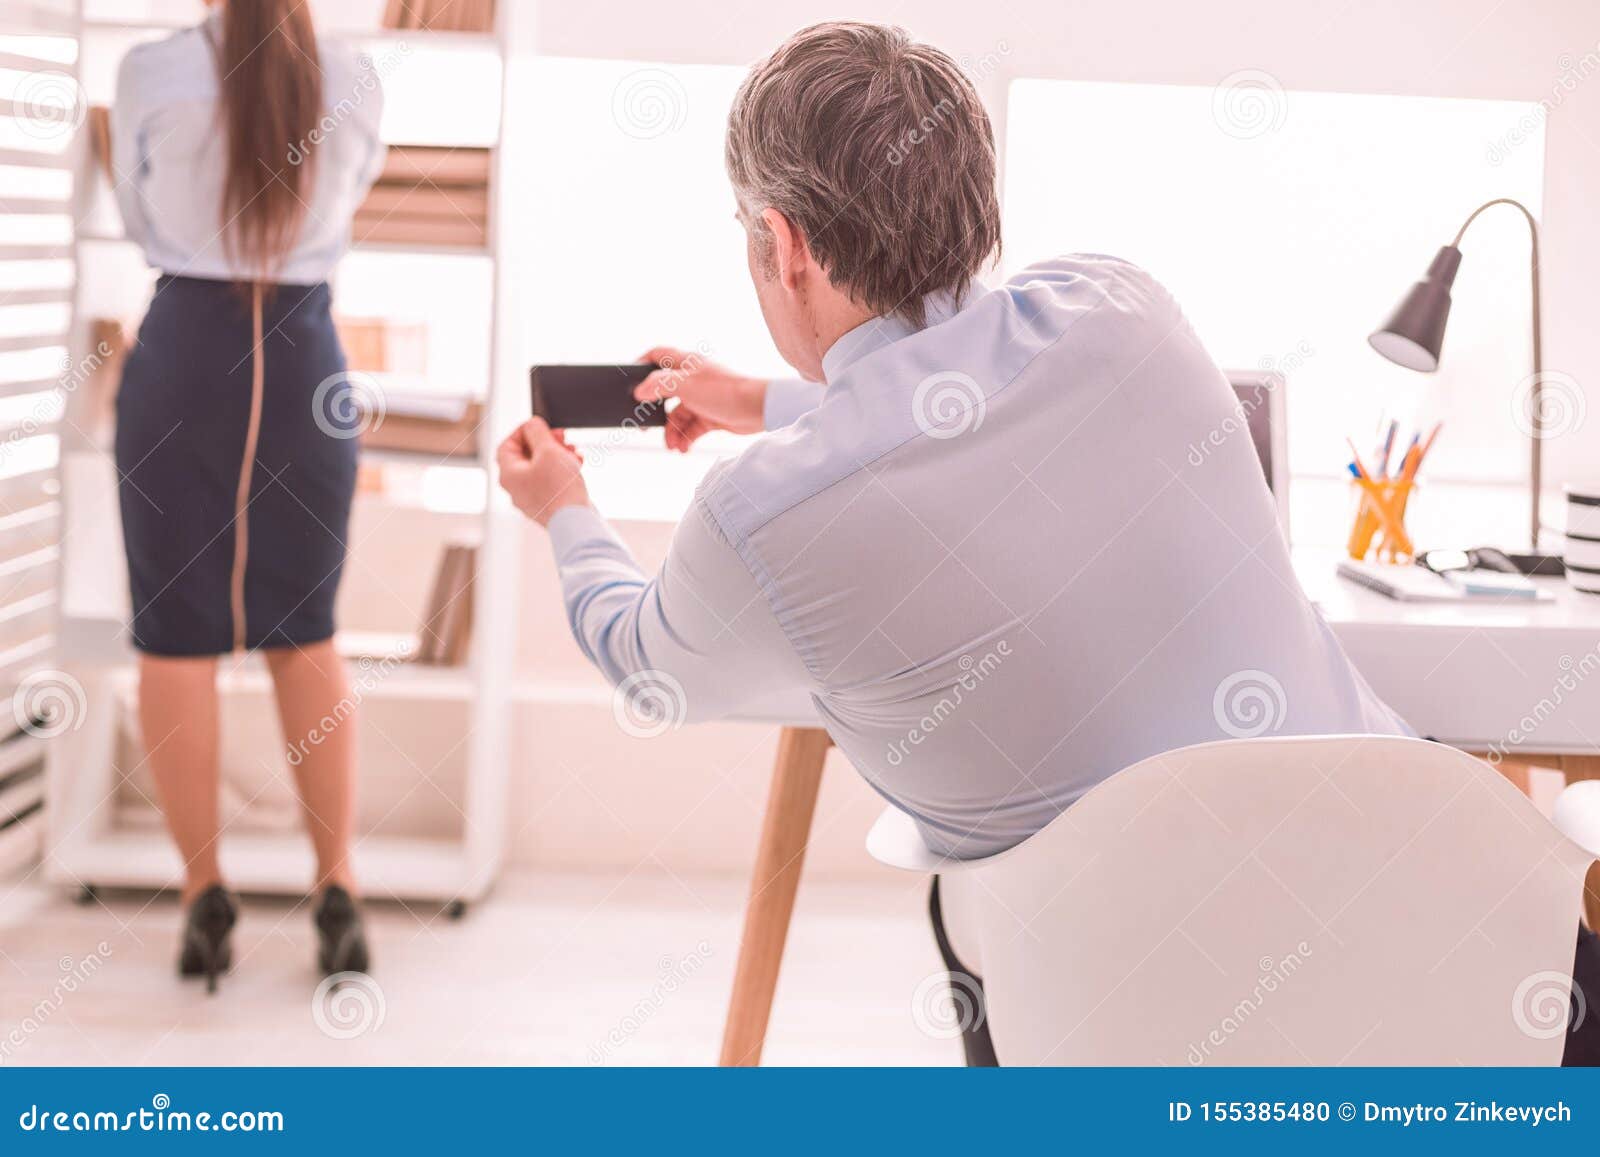 Boss Secretly Taking Pictures Of His Secretary Stock Photo Image Of